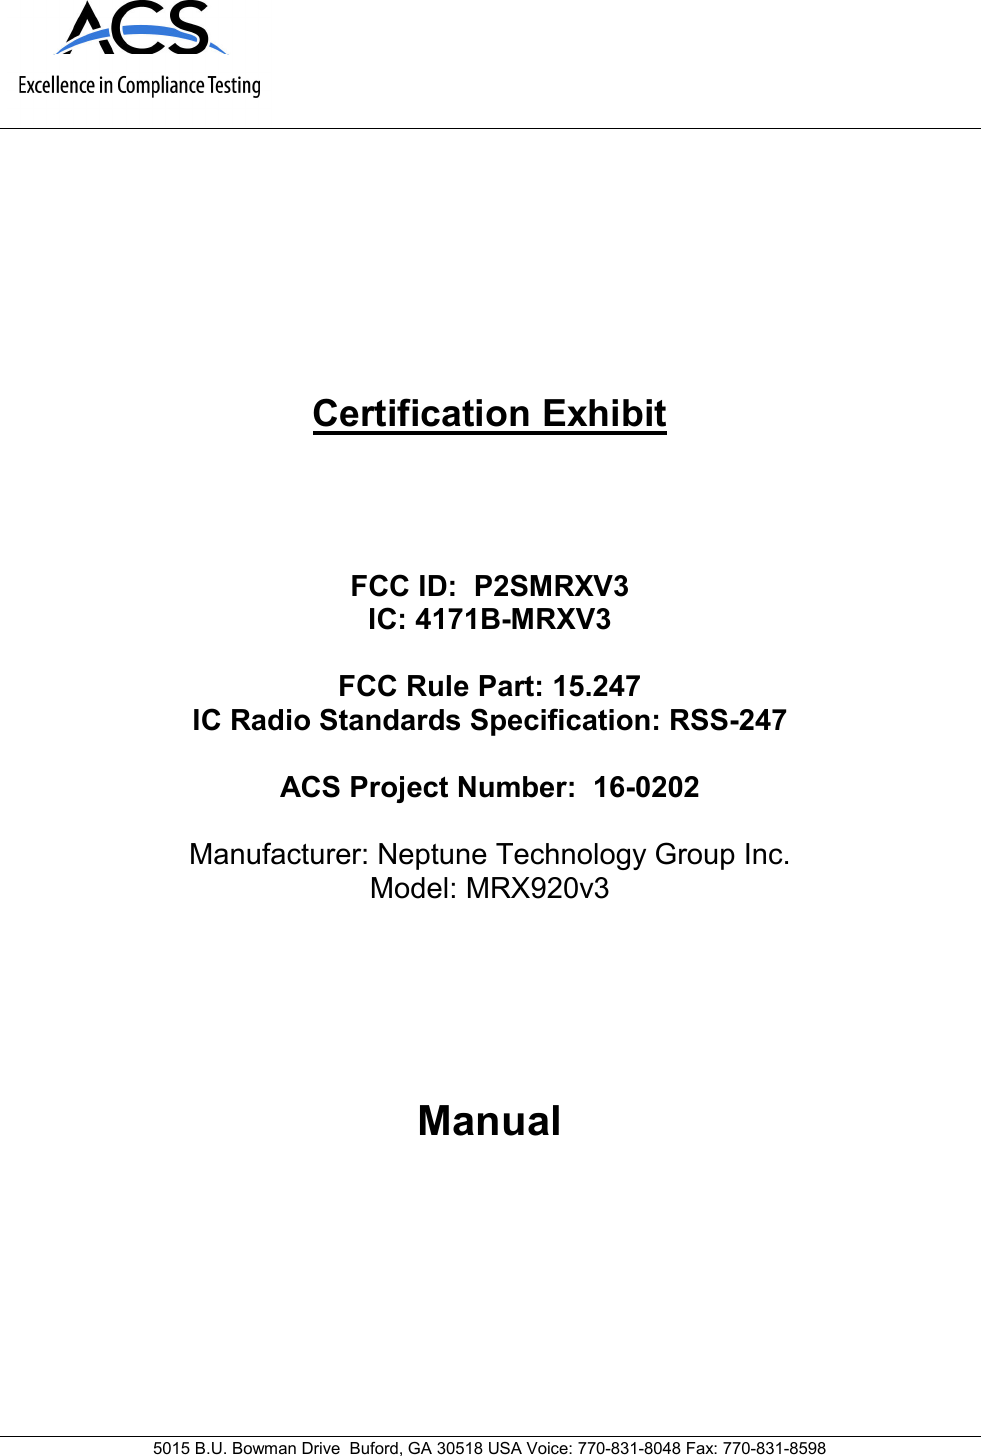      5015 B.U. Bowman Drive  Buford, GA 30518 USA Voice: 770-831-8048 Fax: 770-831-8598   Certification Exhibit     FCC ID:  P2SMRXV3 IC: 4171B-MRXV3  FCC Rule Part: 15.247 IC Radio Standards Specification: RSS-247  ACS Project Number:  16-0202   Manufacturer: Neptune Technology Group Inc. Model: MRX920v3     Manual      